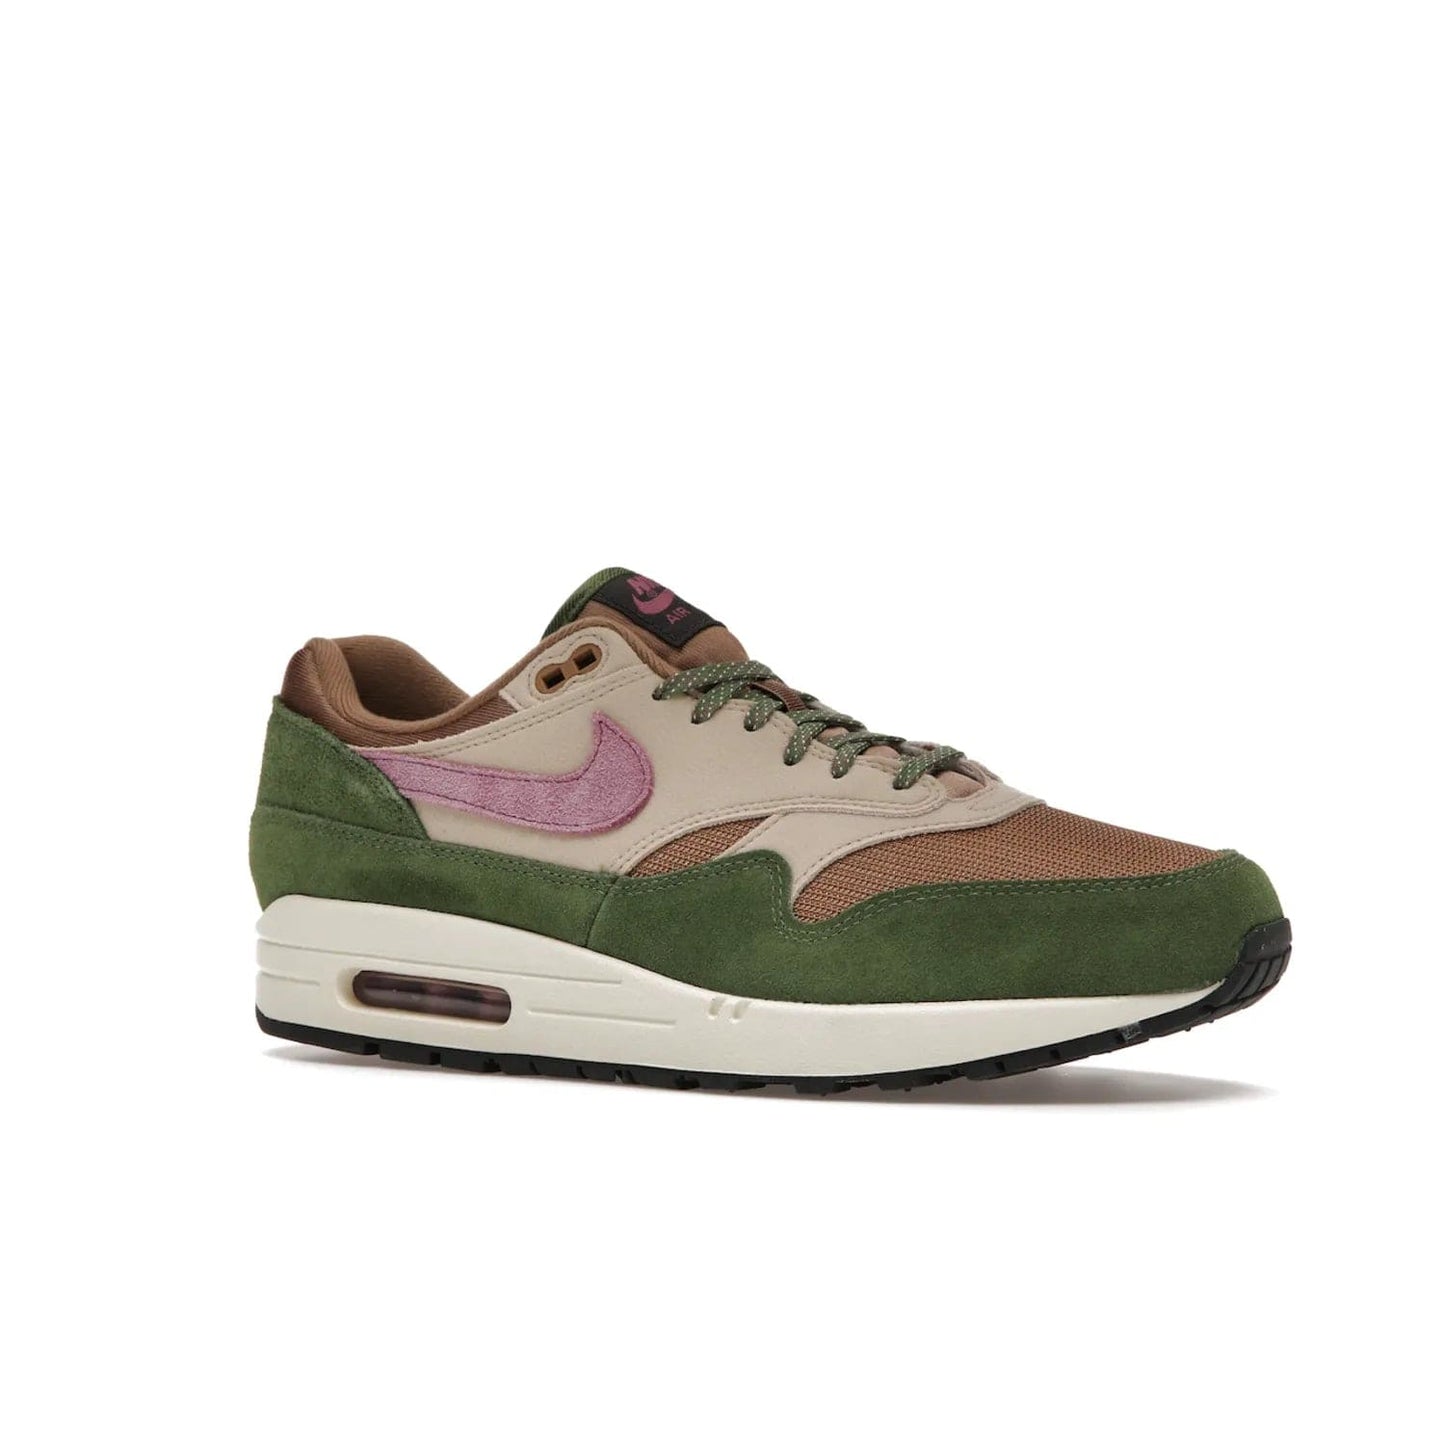 Nike Air Max 1 SH Treeline - Image 4 - Only at www.BallersClubKickz.com - A classic Nike Air Max 1 SH Treeline with a brown mesh upper, taupe Durabuck overlays, and hairy green suede details. Light Bordeaux Swoosh and woven tongue label for a pop of color. Released in May 2022. Perfect for any outfit and sure to impress.